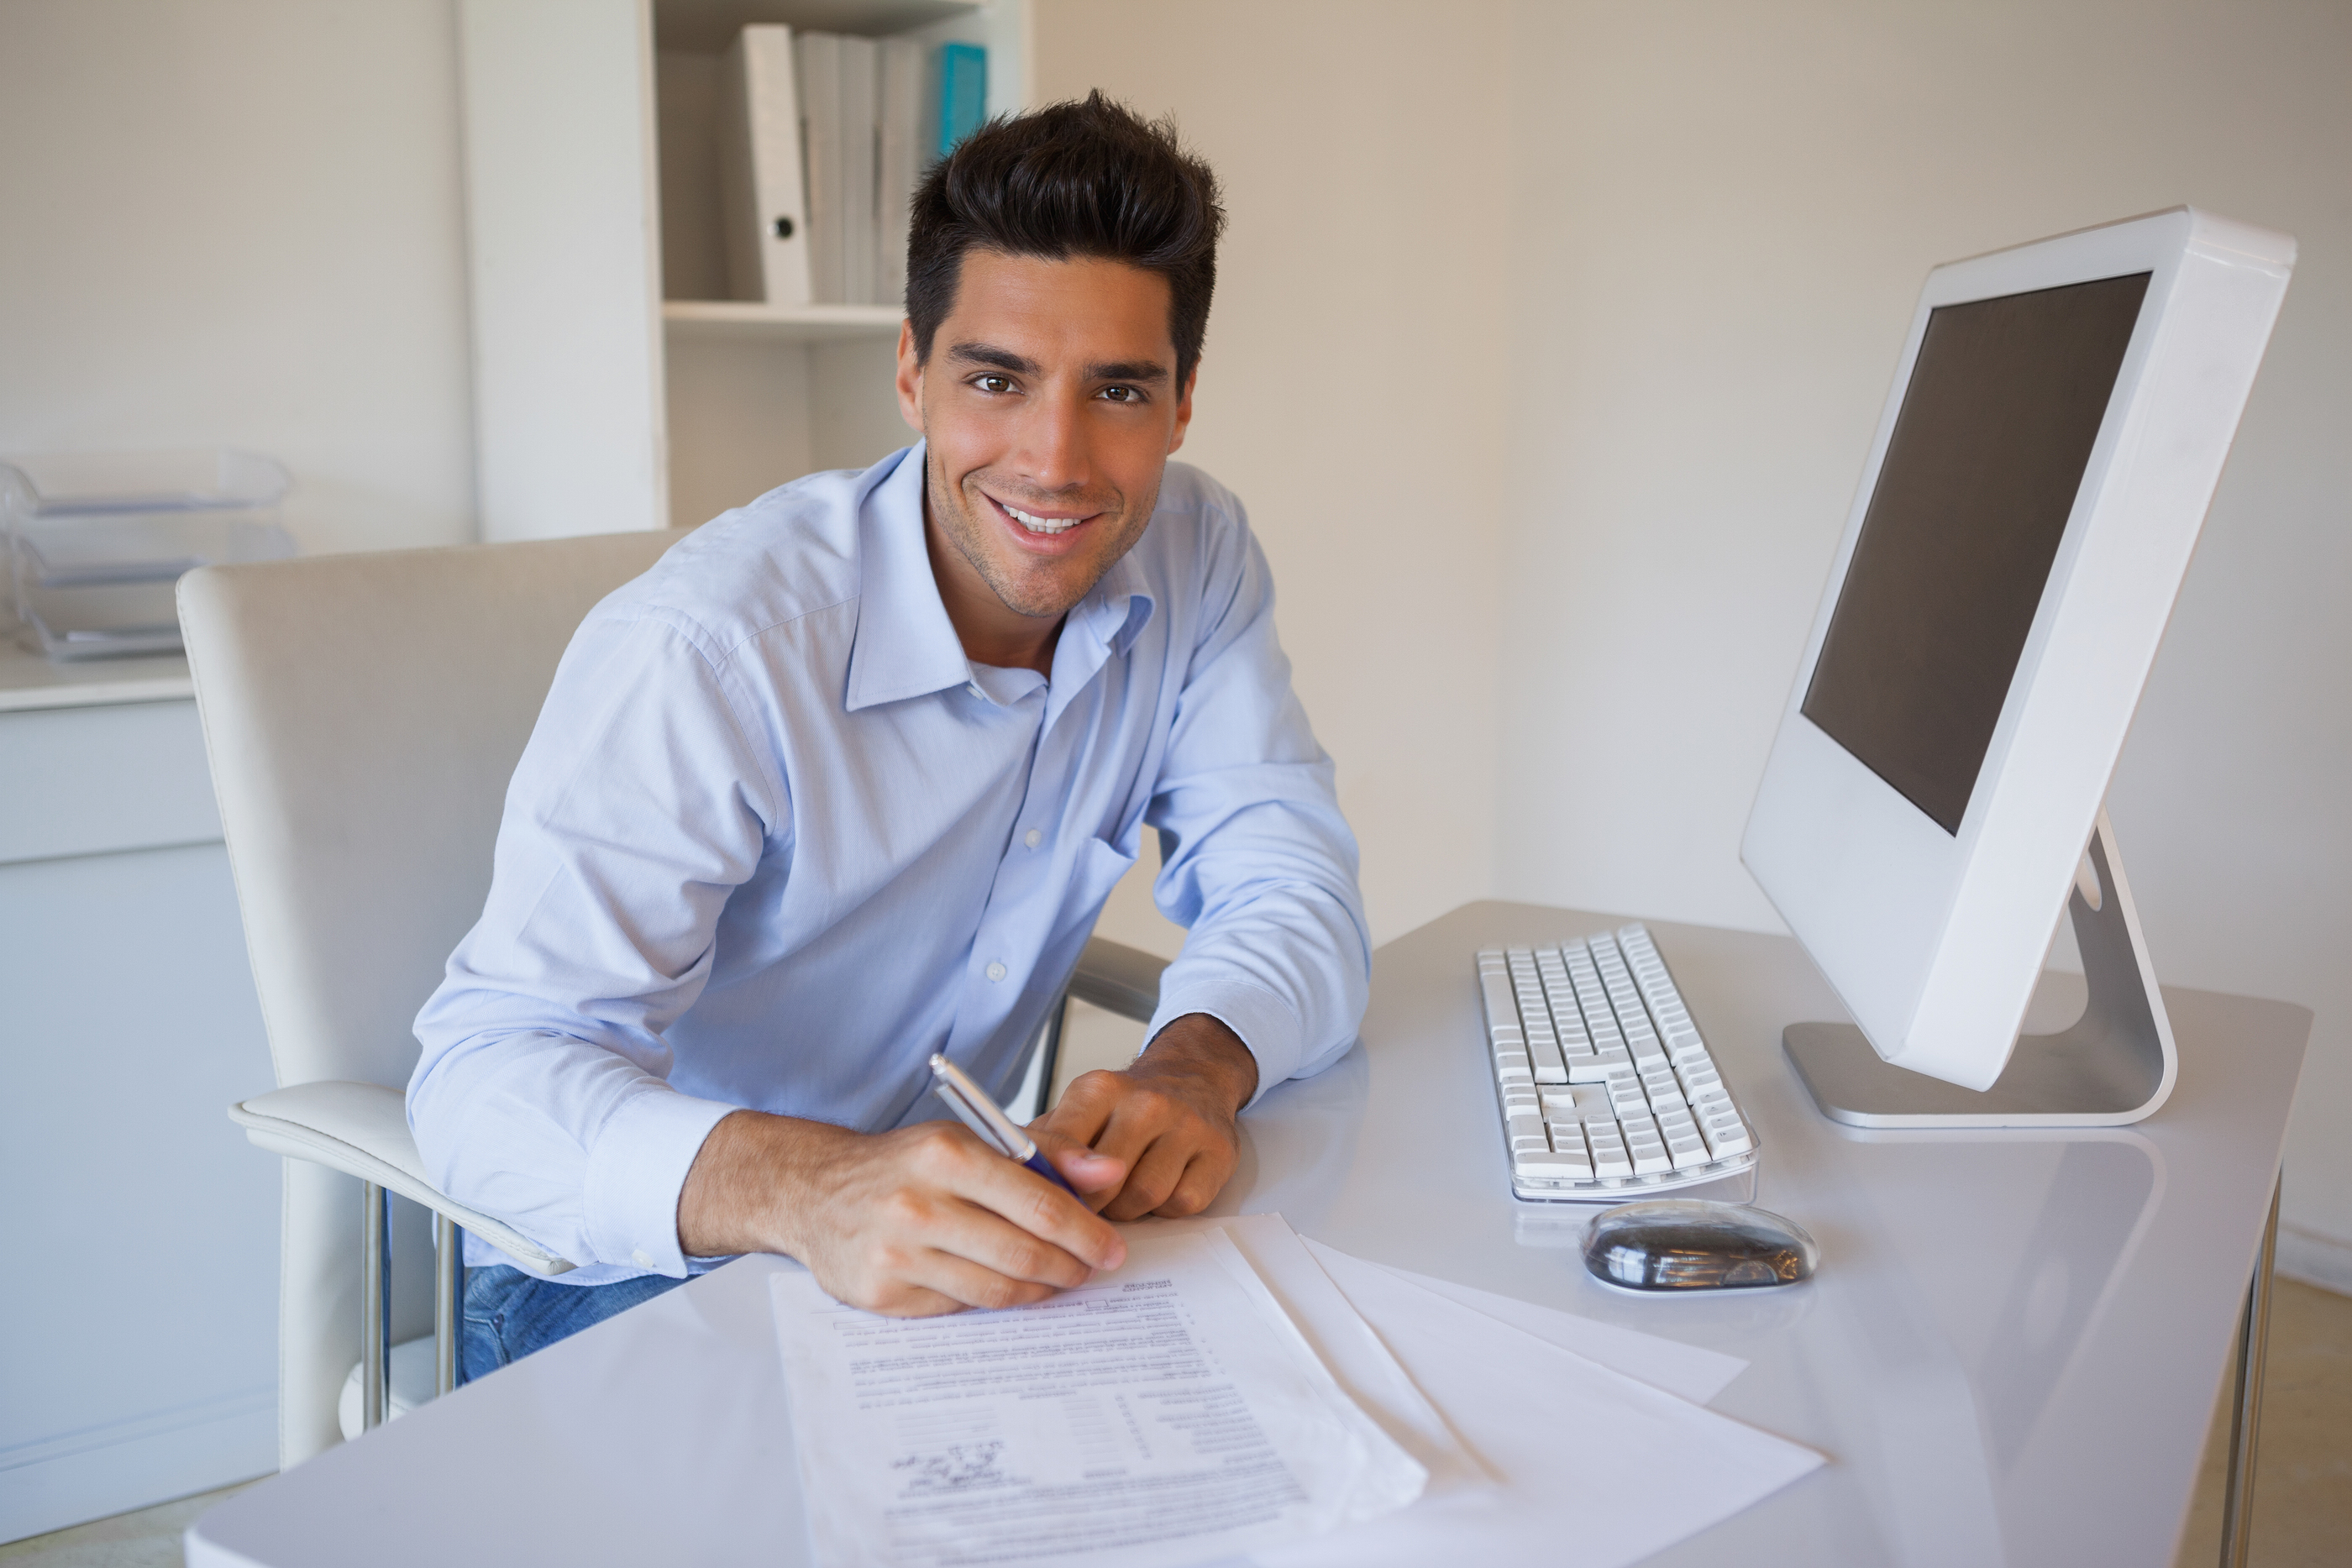 A man wearing a blue shirt is sitting at a desk in an office. He has one hand resting on a document, the other holding a pen. He is looking at the camera and smiling.